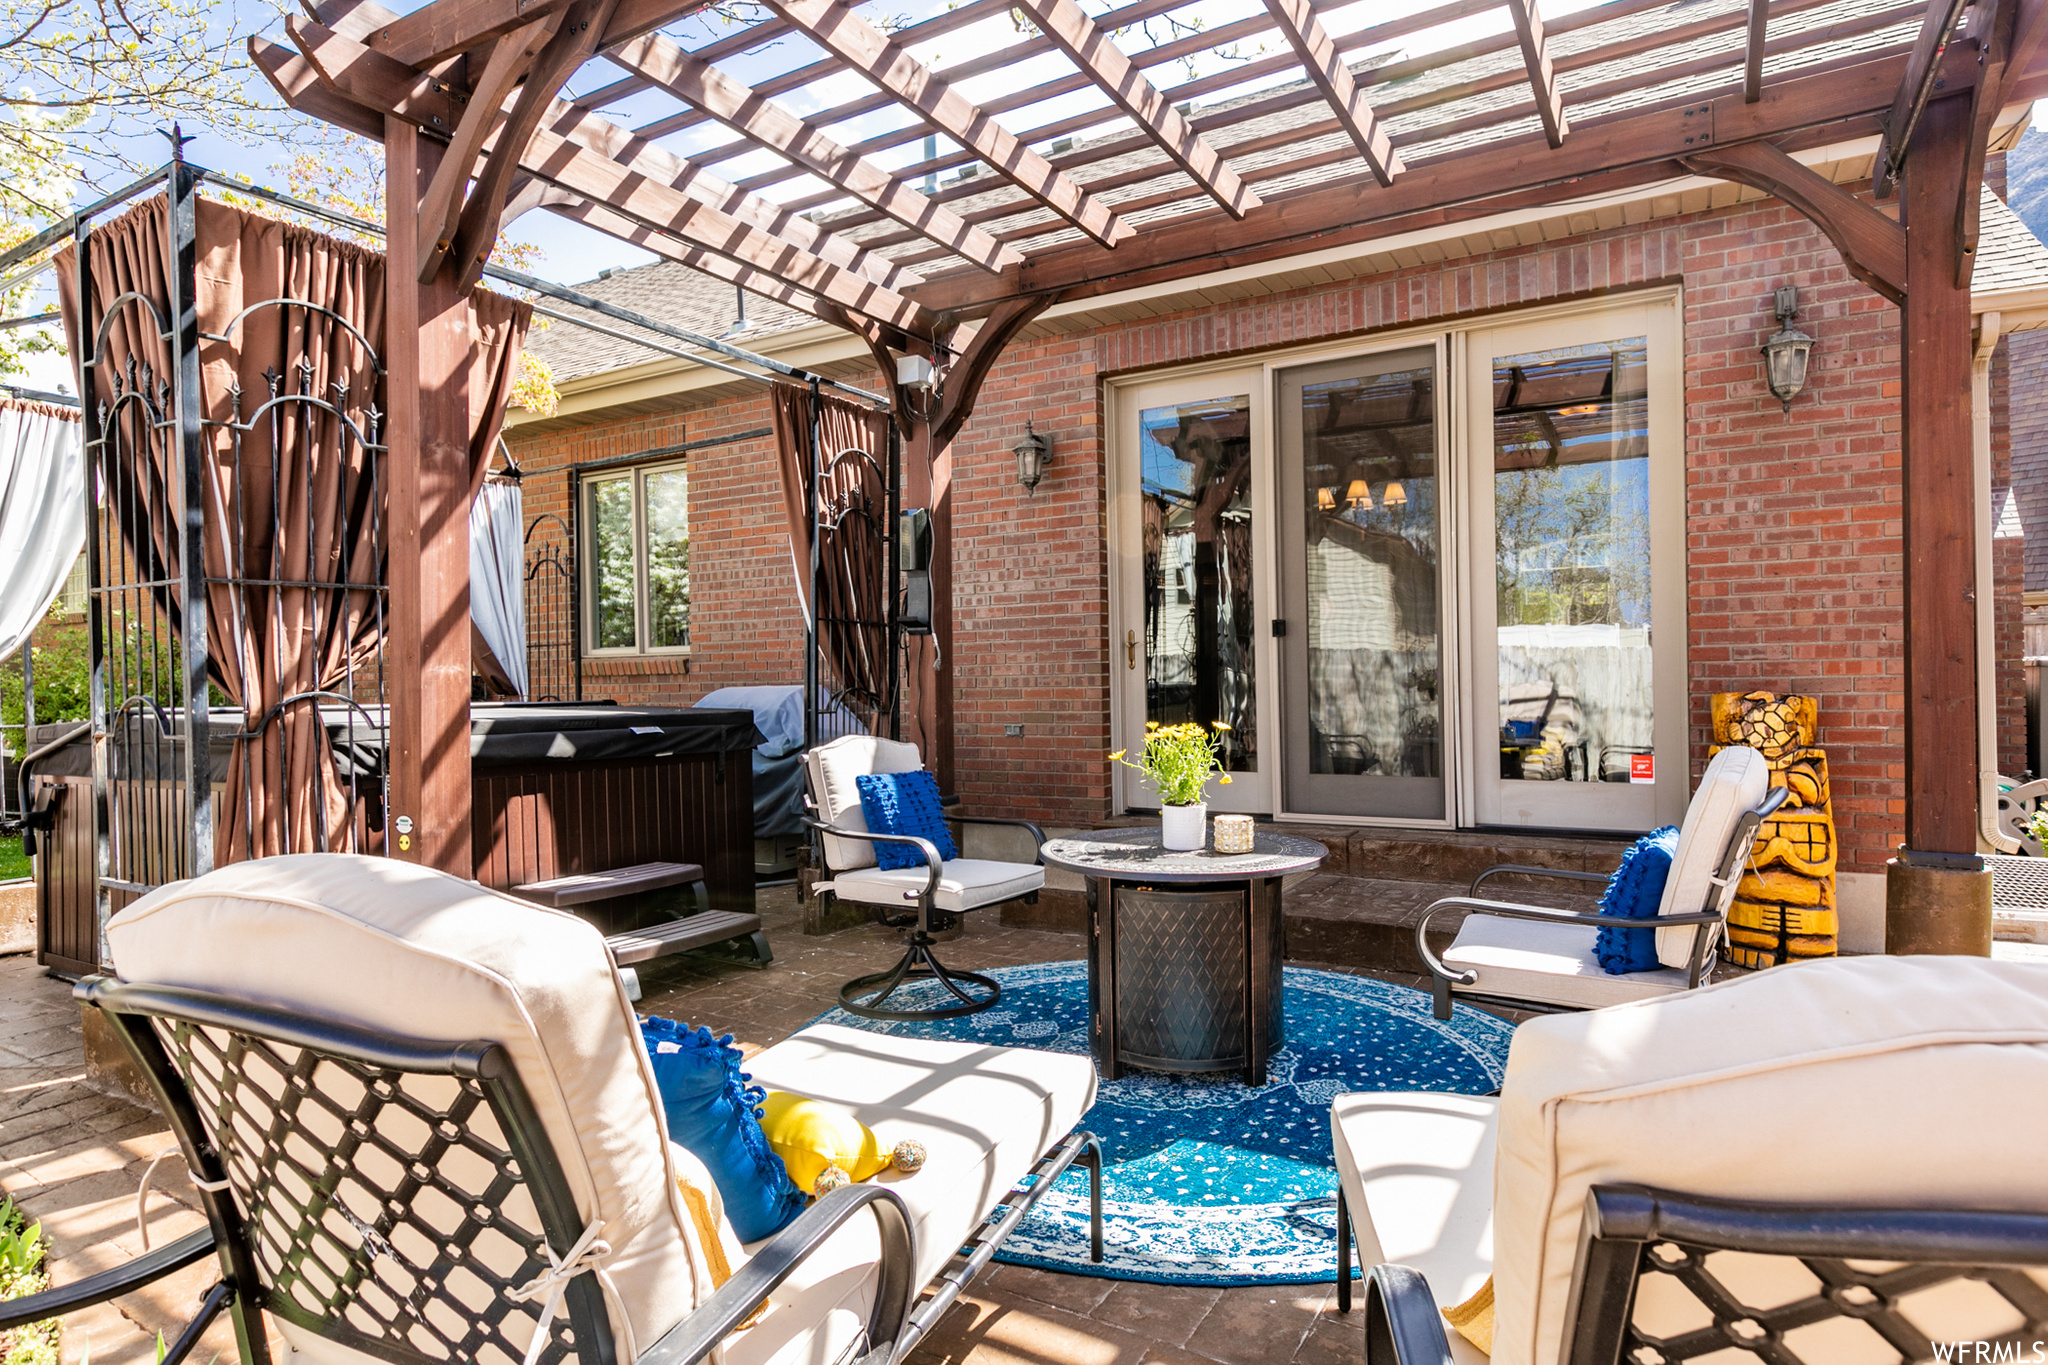 Enjoy BBQs and relaxing on the patio just off the kitchen & dining area.